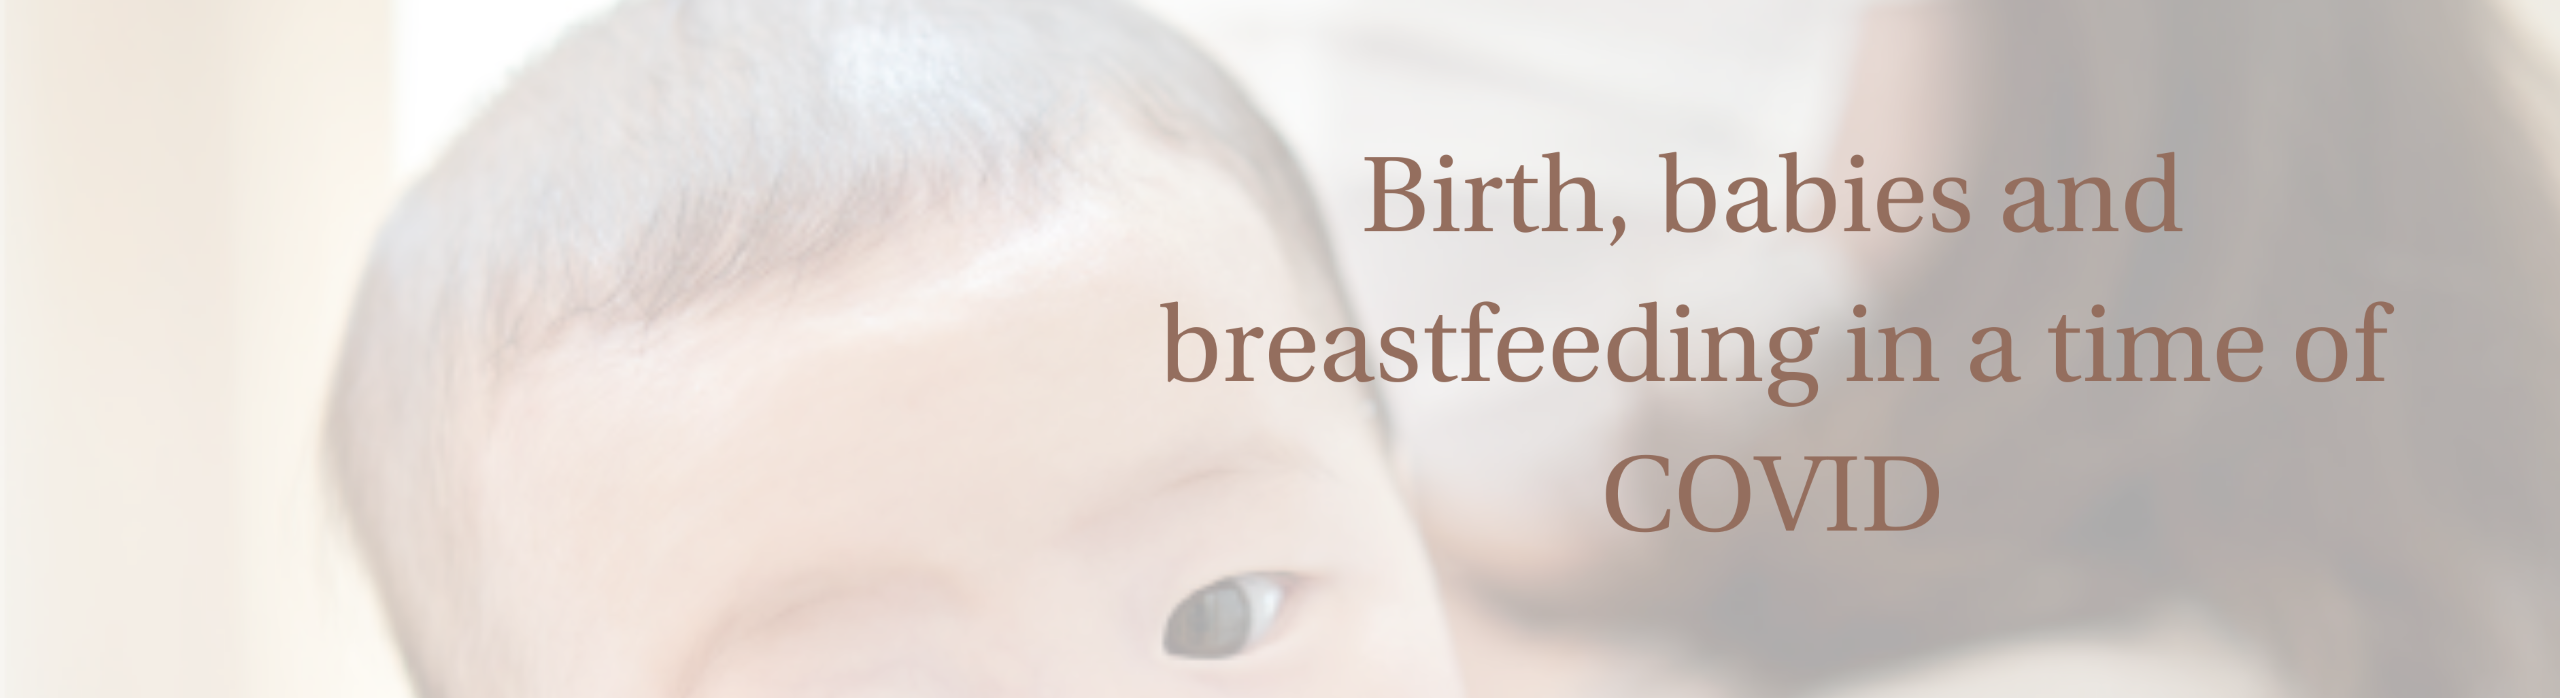 Birth, babies and breastfeeding in a time of COVID